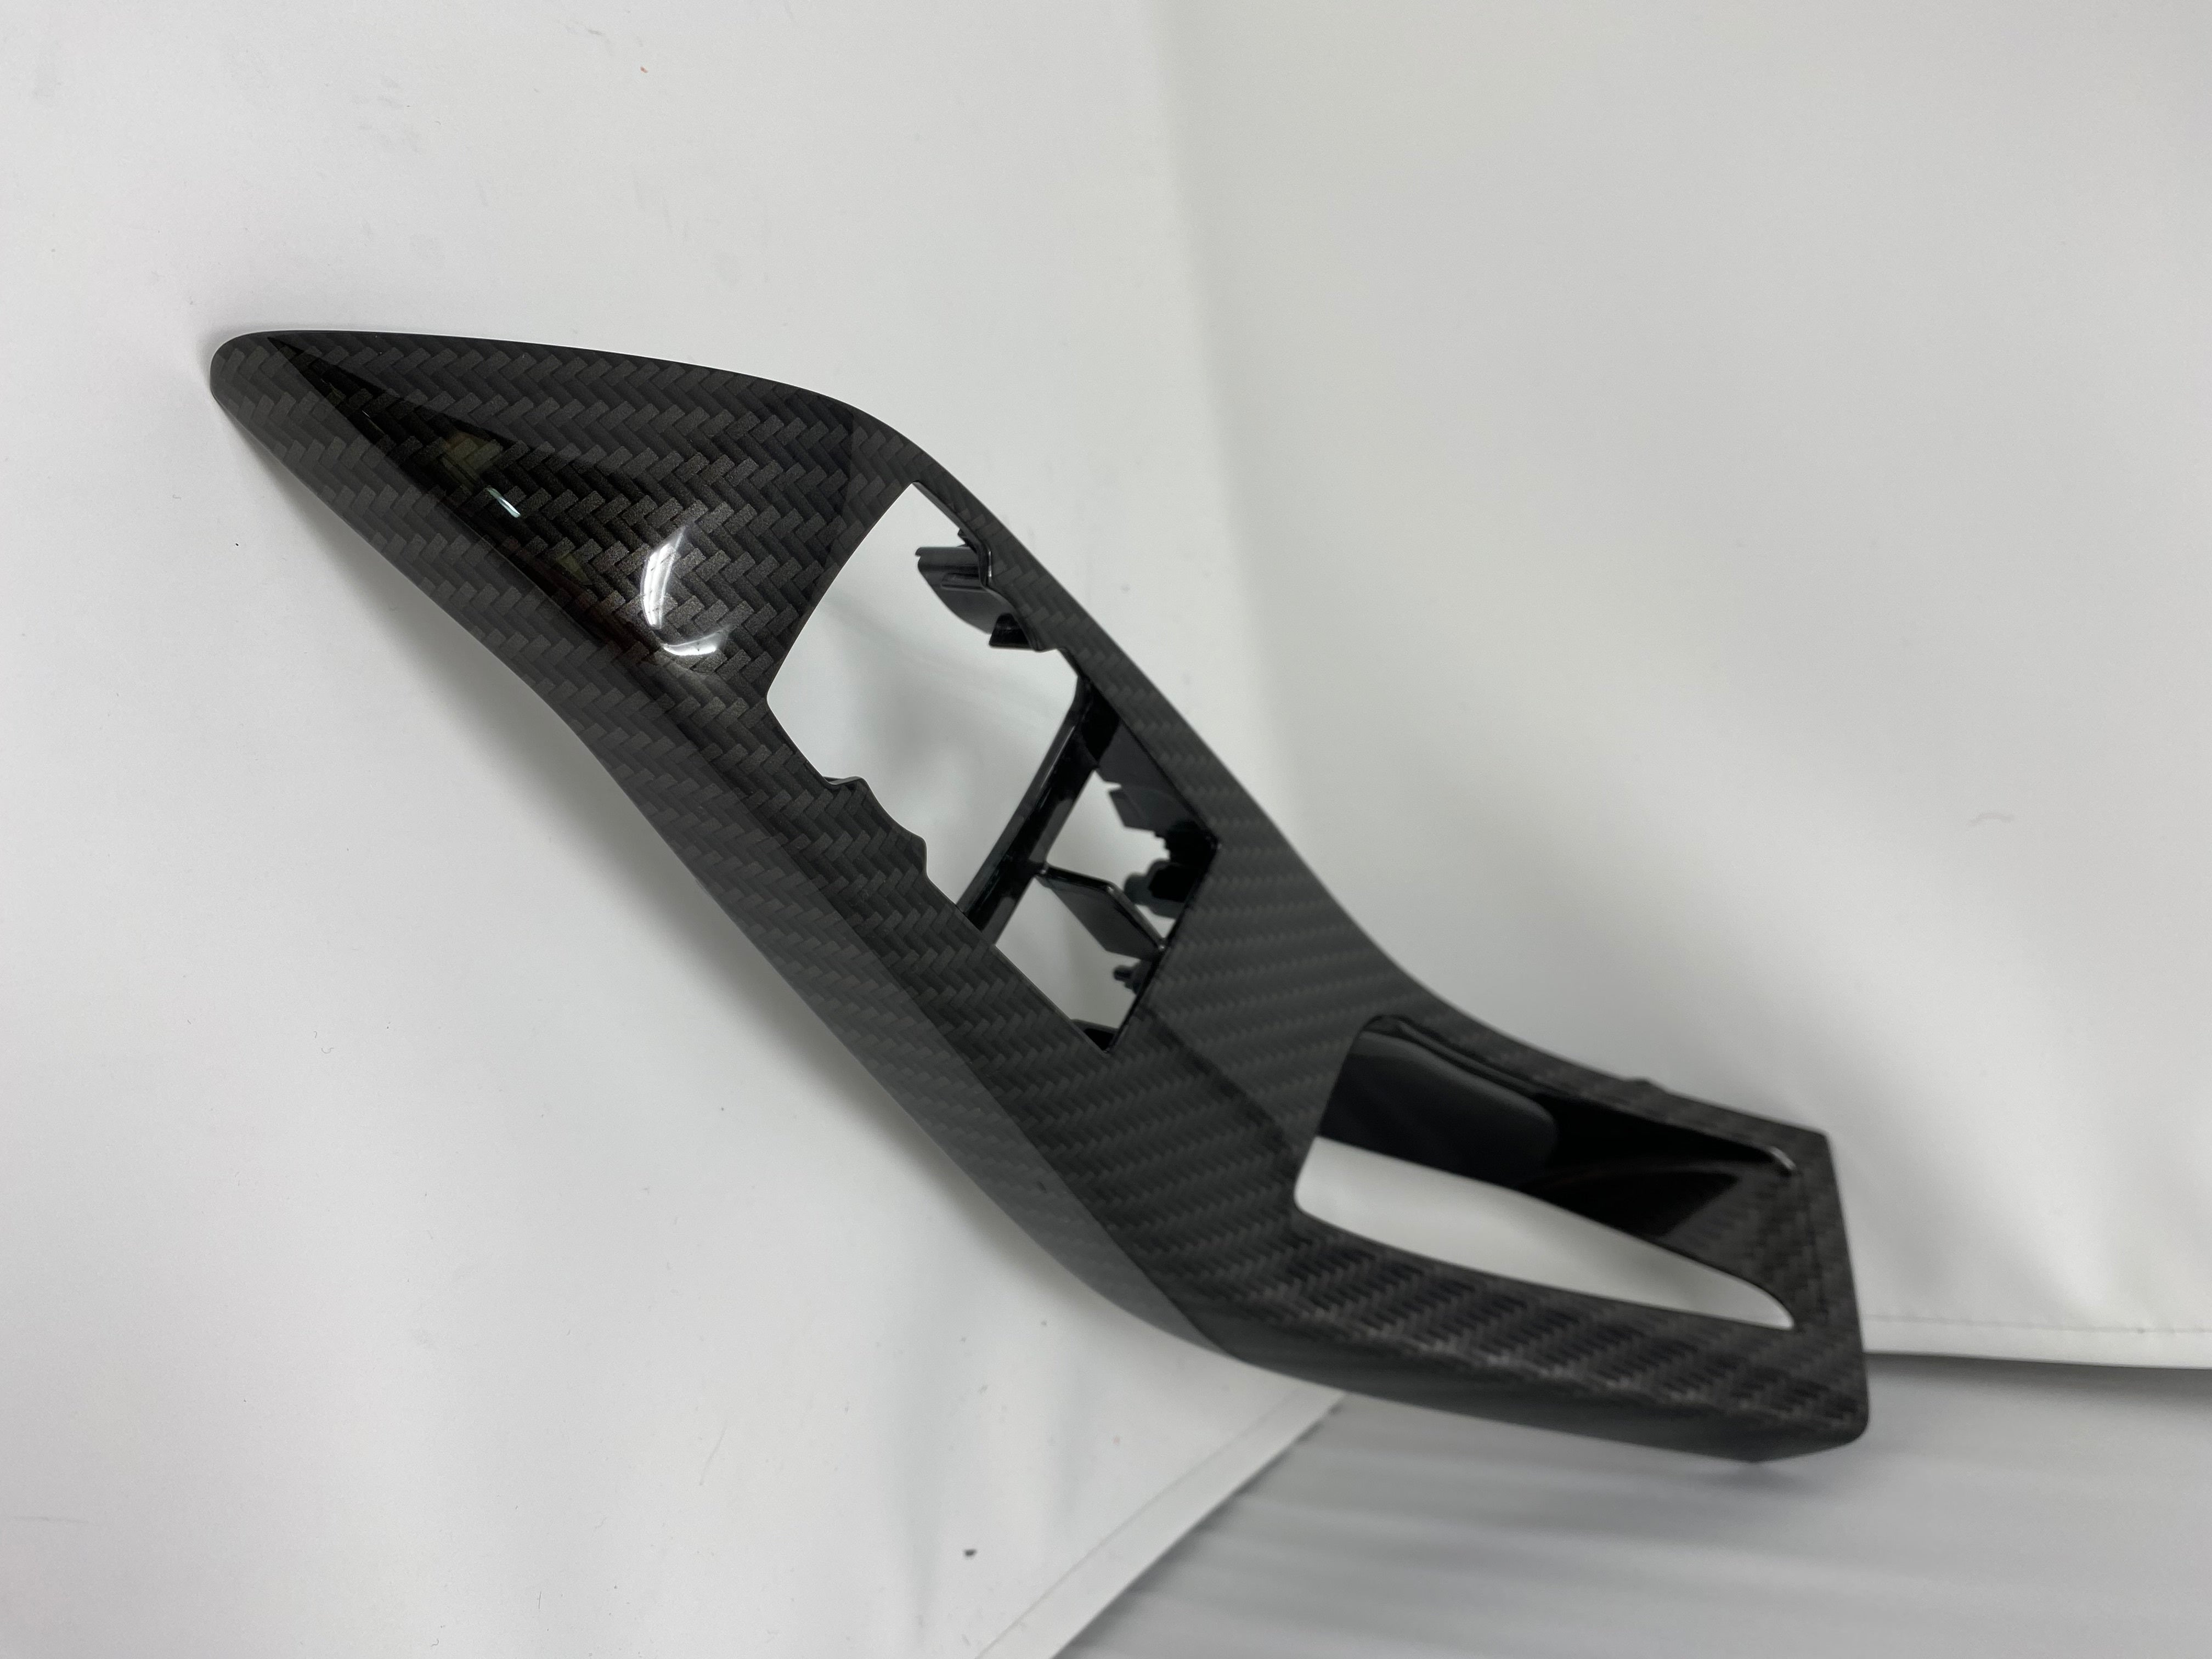 Genuine Ford Interior Door Handle Trims - Mk8/8.5 Fiesta (Painted/Hydrodipped Finishes)